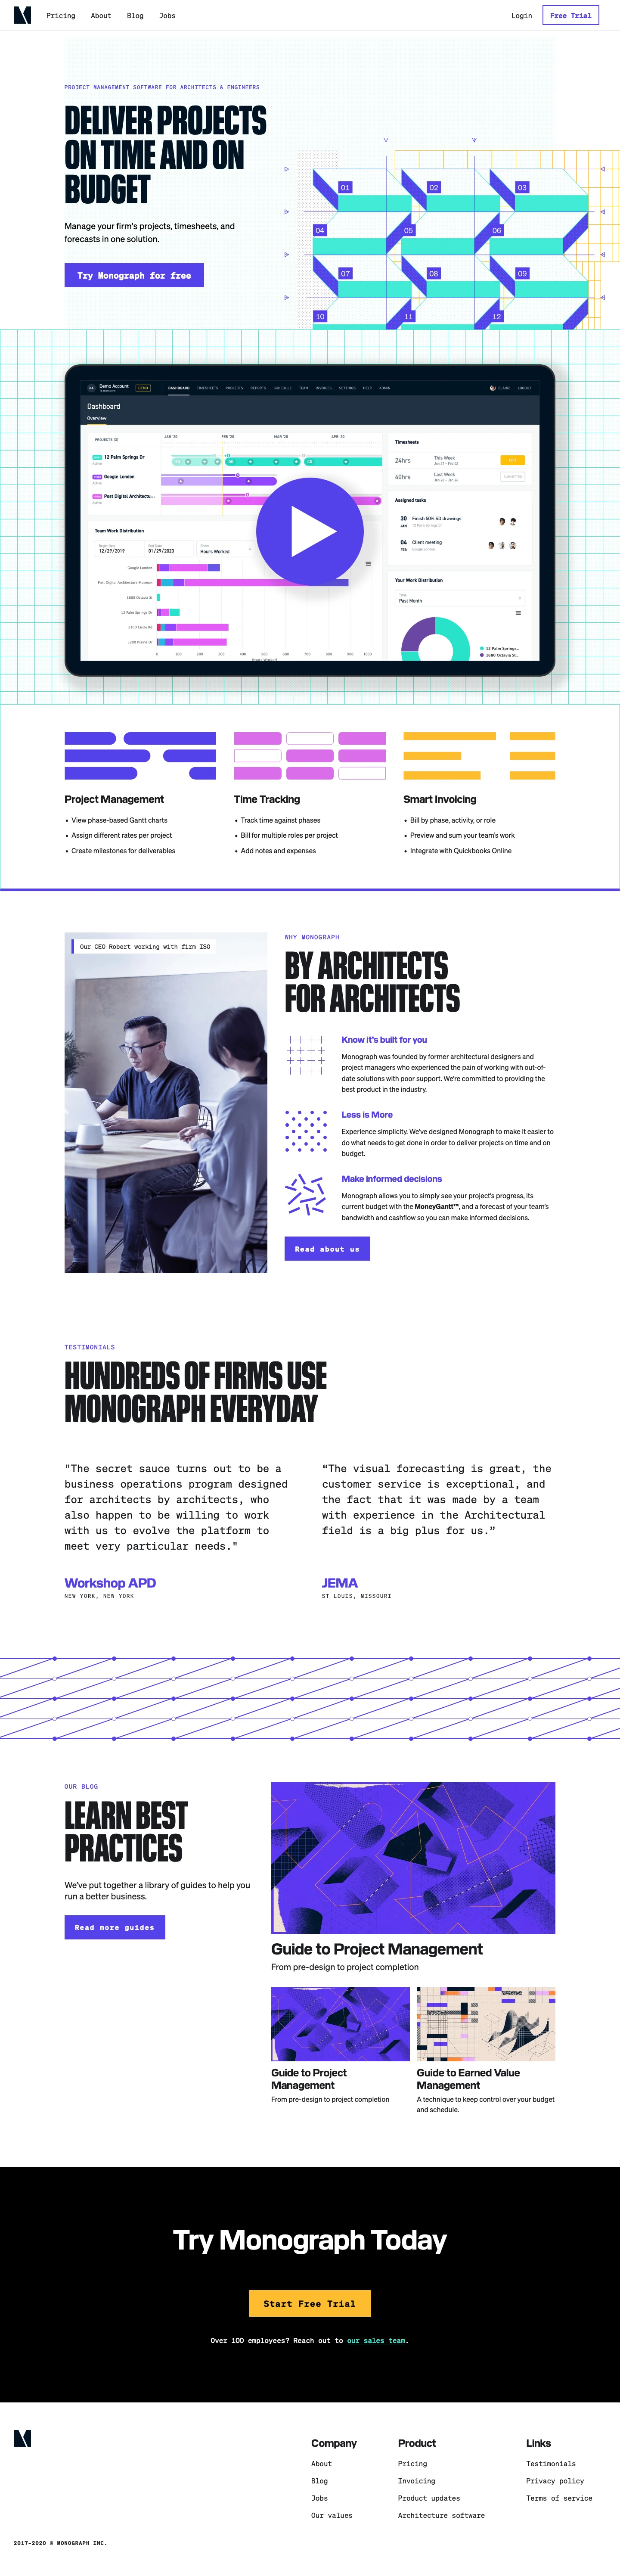 Monograph Landing Page Example: A modern firm management tool for architects: a complete product for managing tasks, tracking time, and invoicing clients.